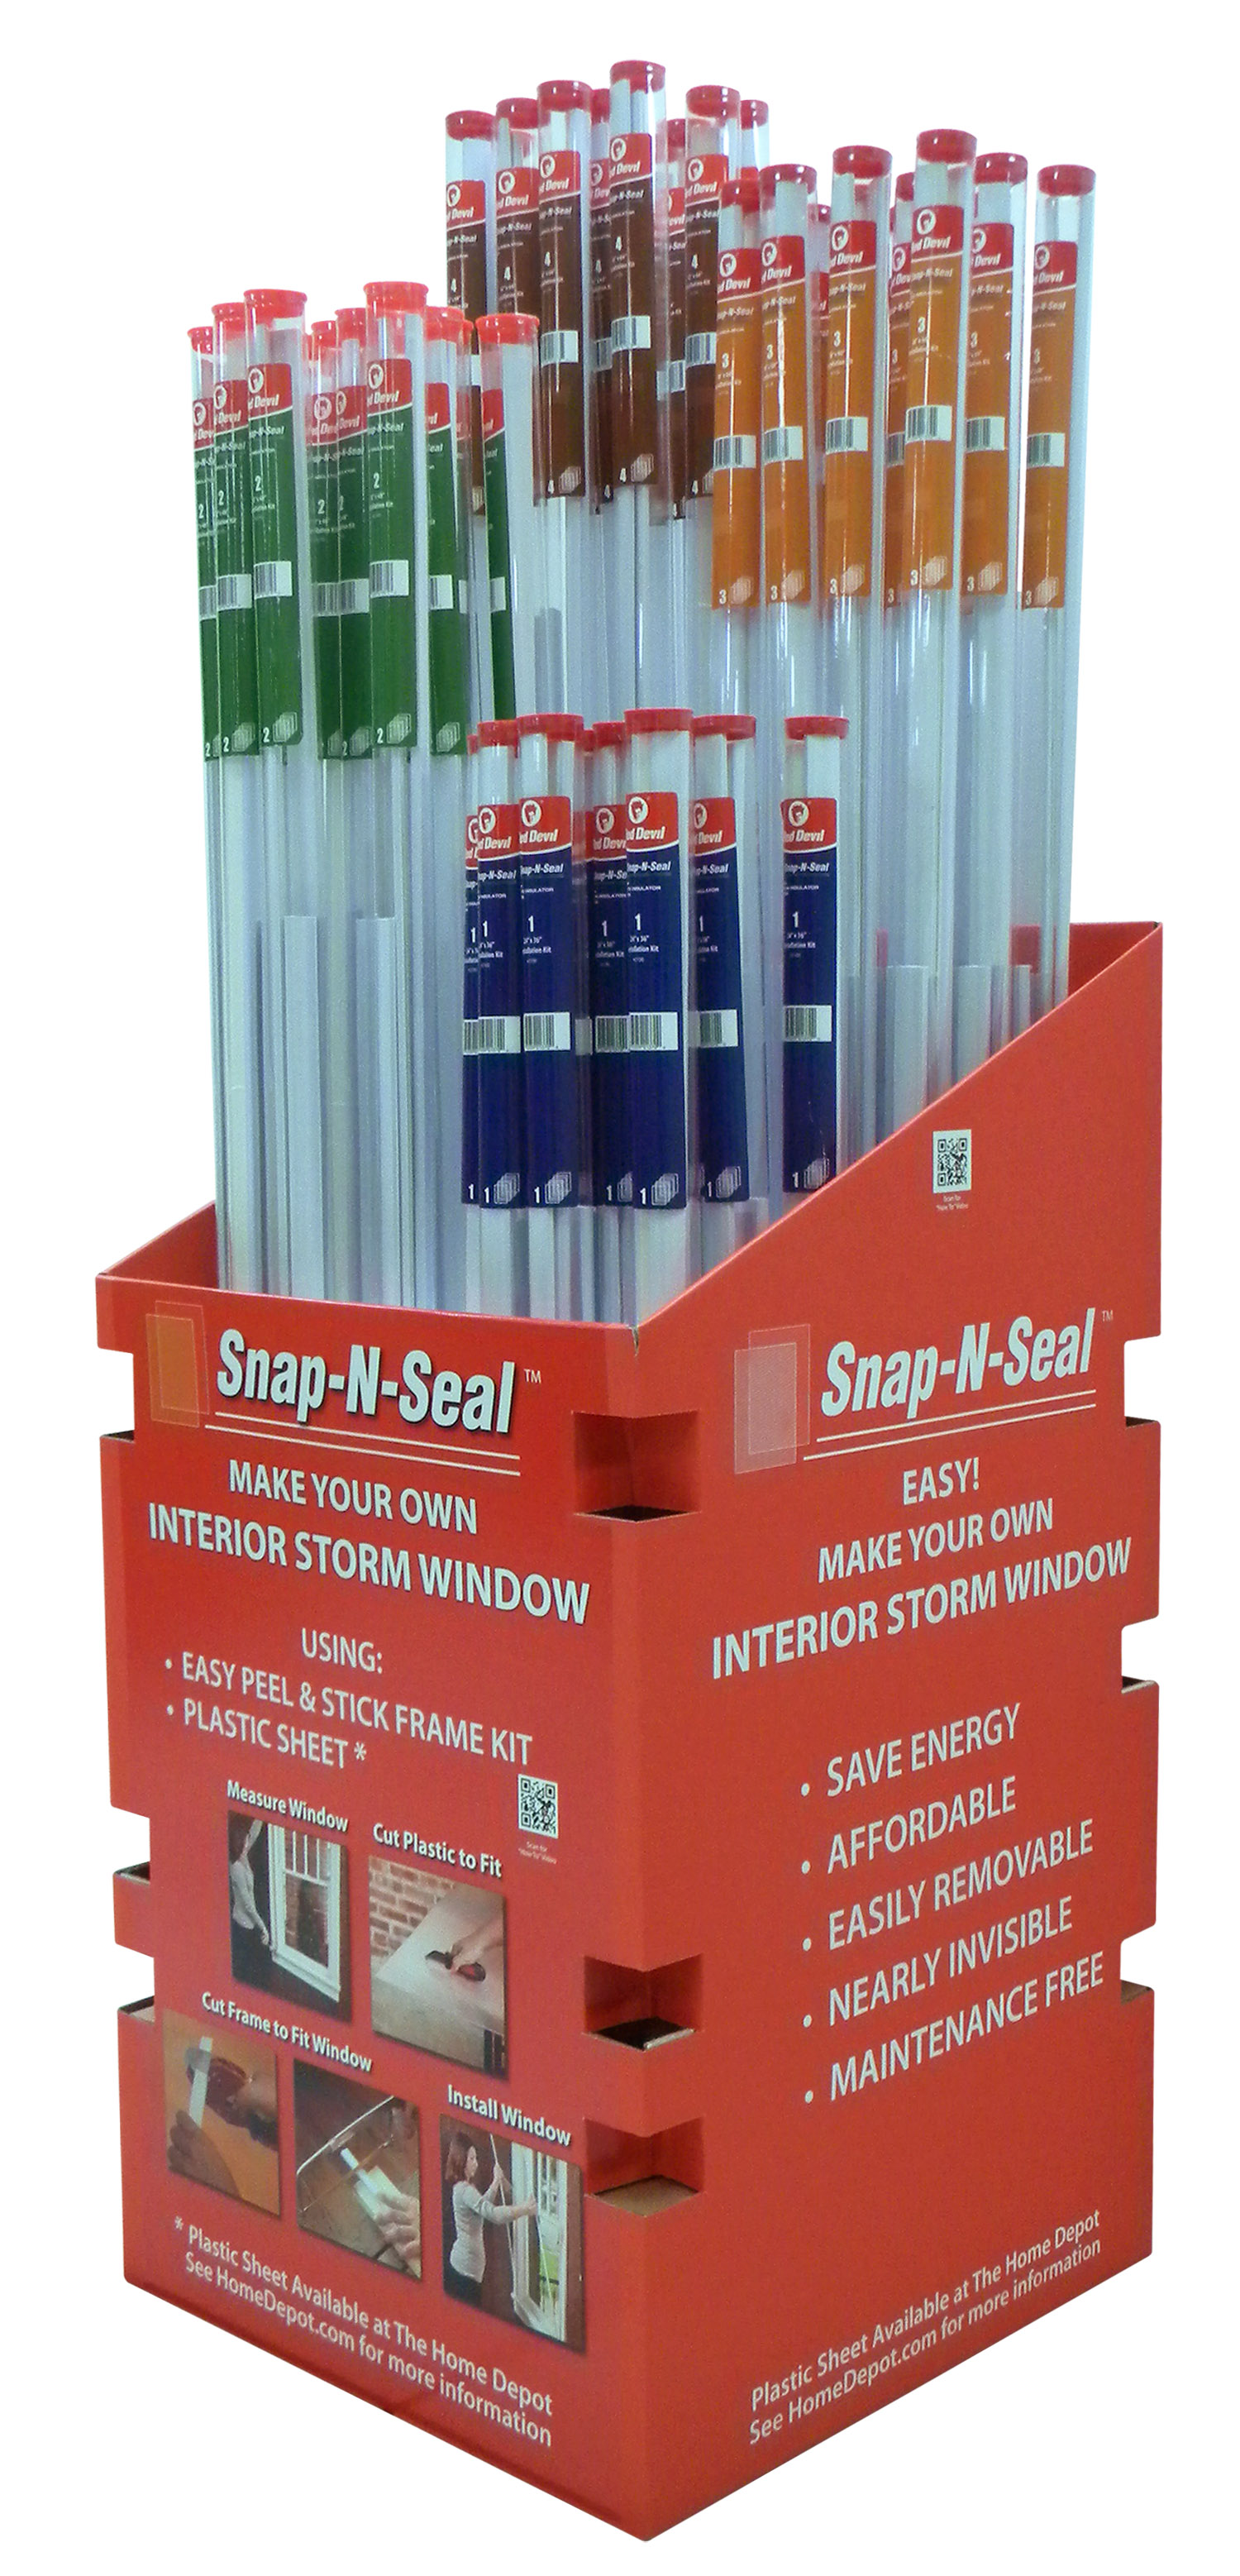 Red Devil Introduces Snap N Seal Window Insulator Kit In The